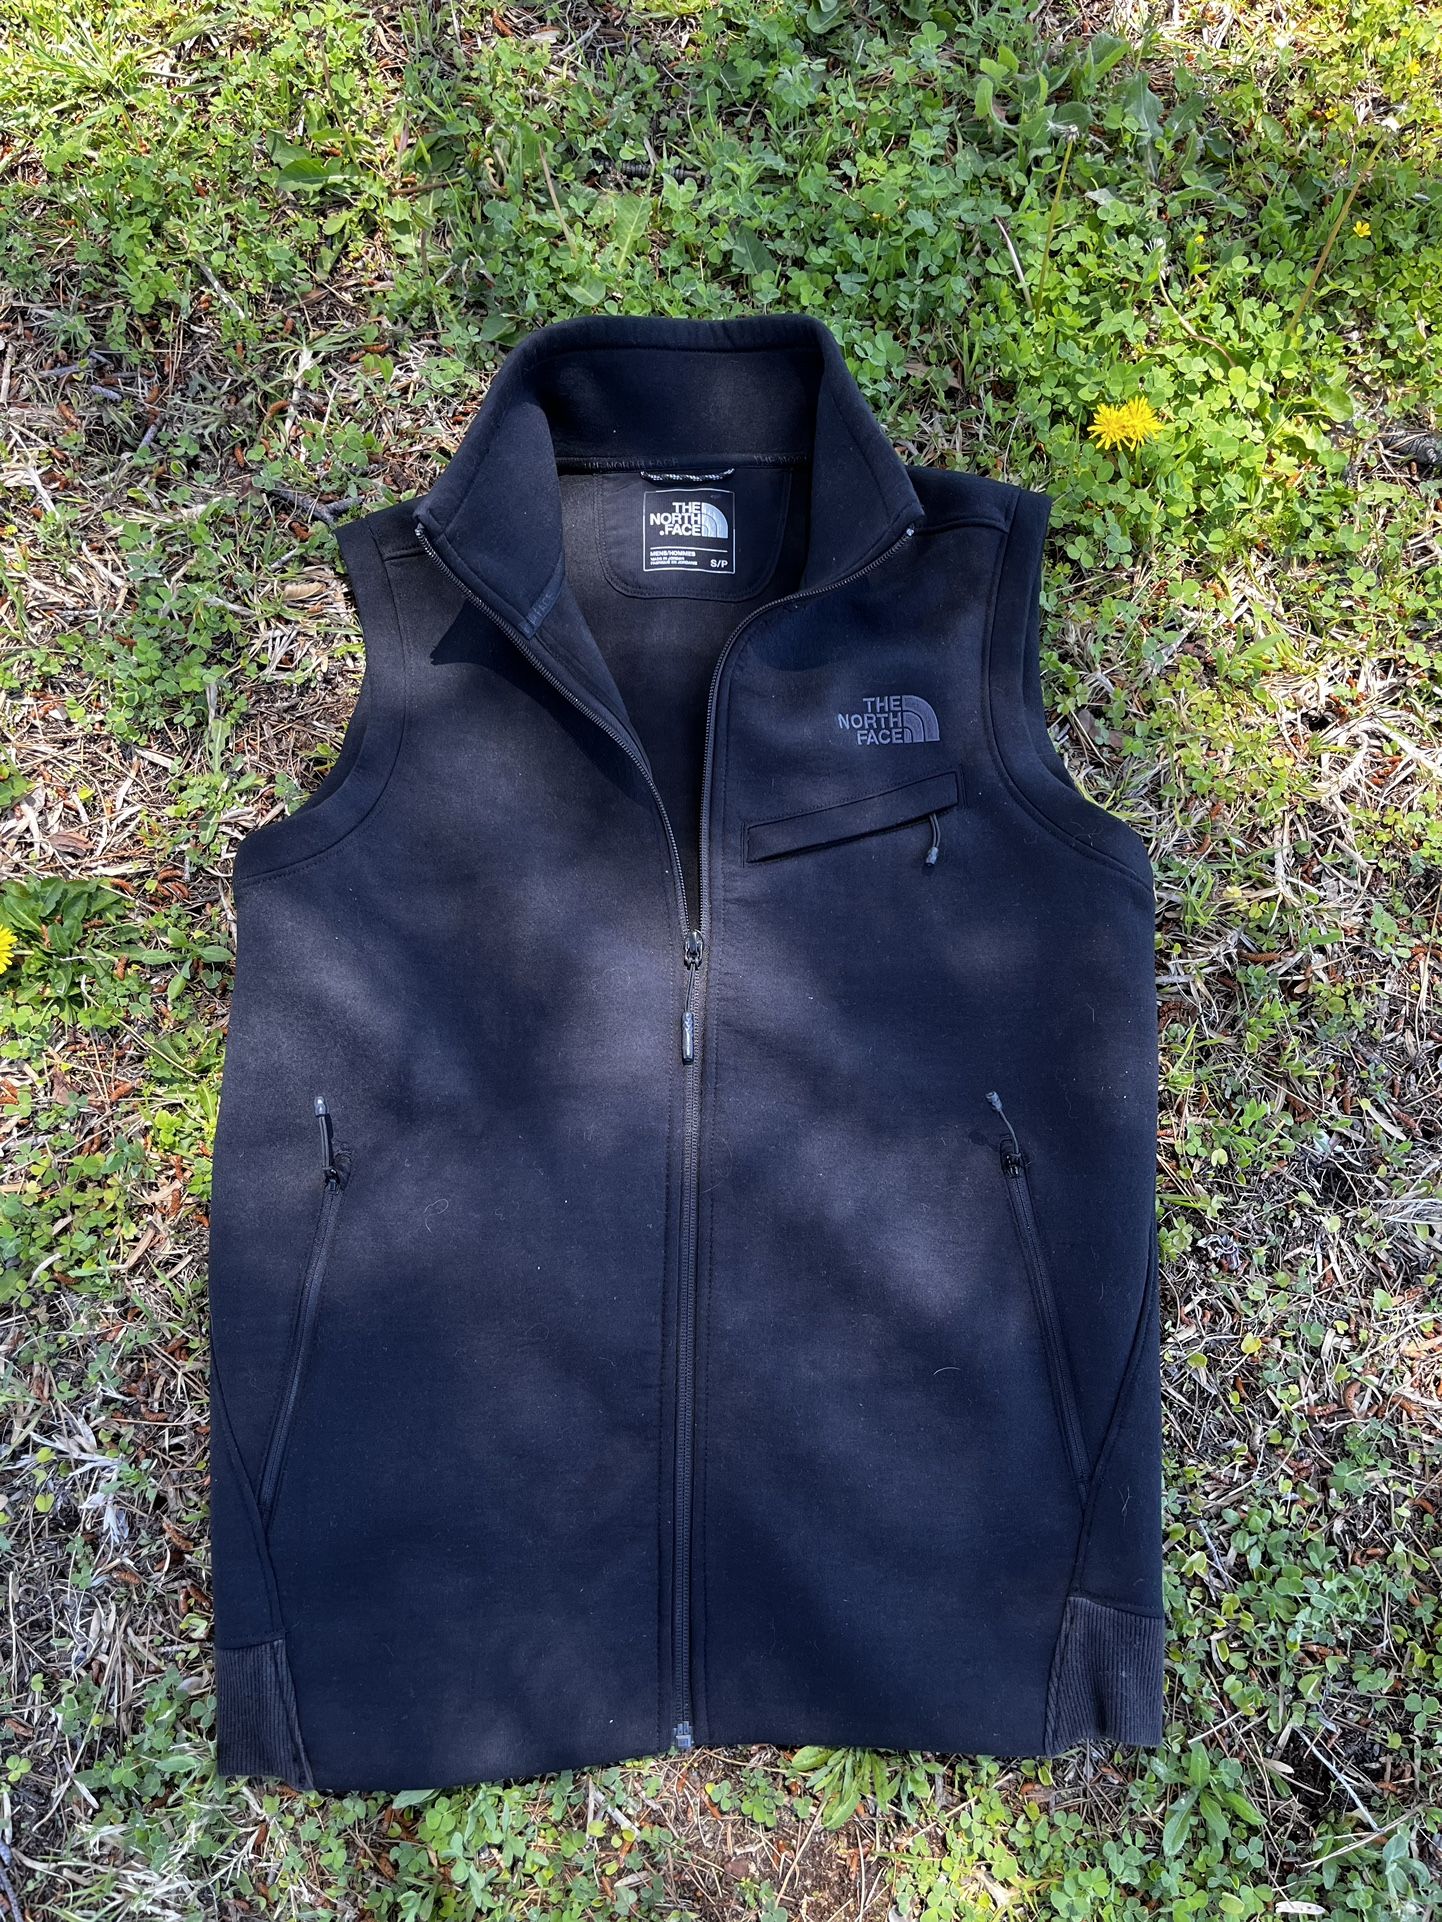 The North Face zip up vest